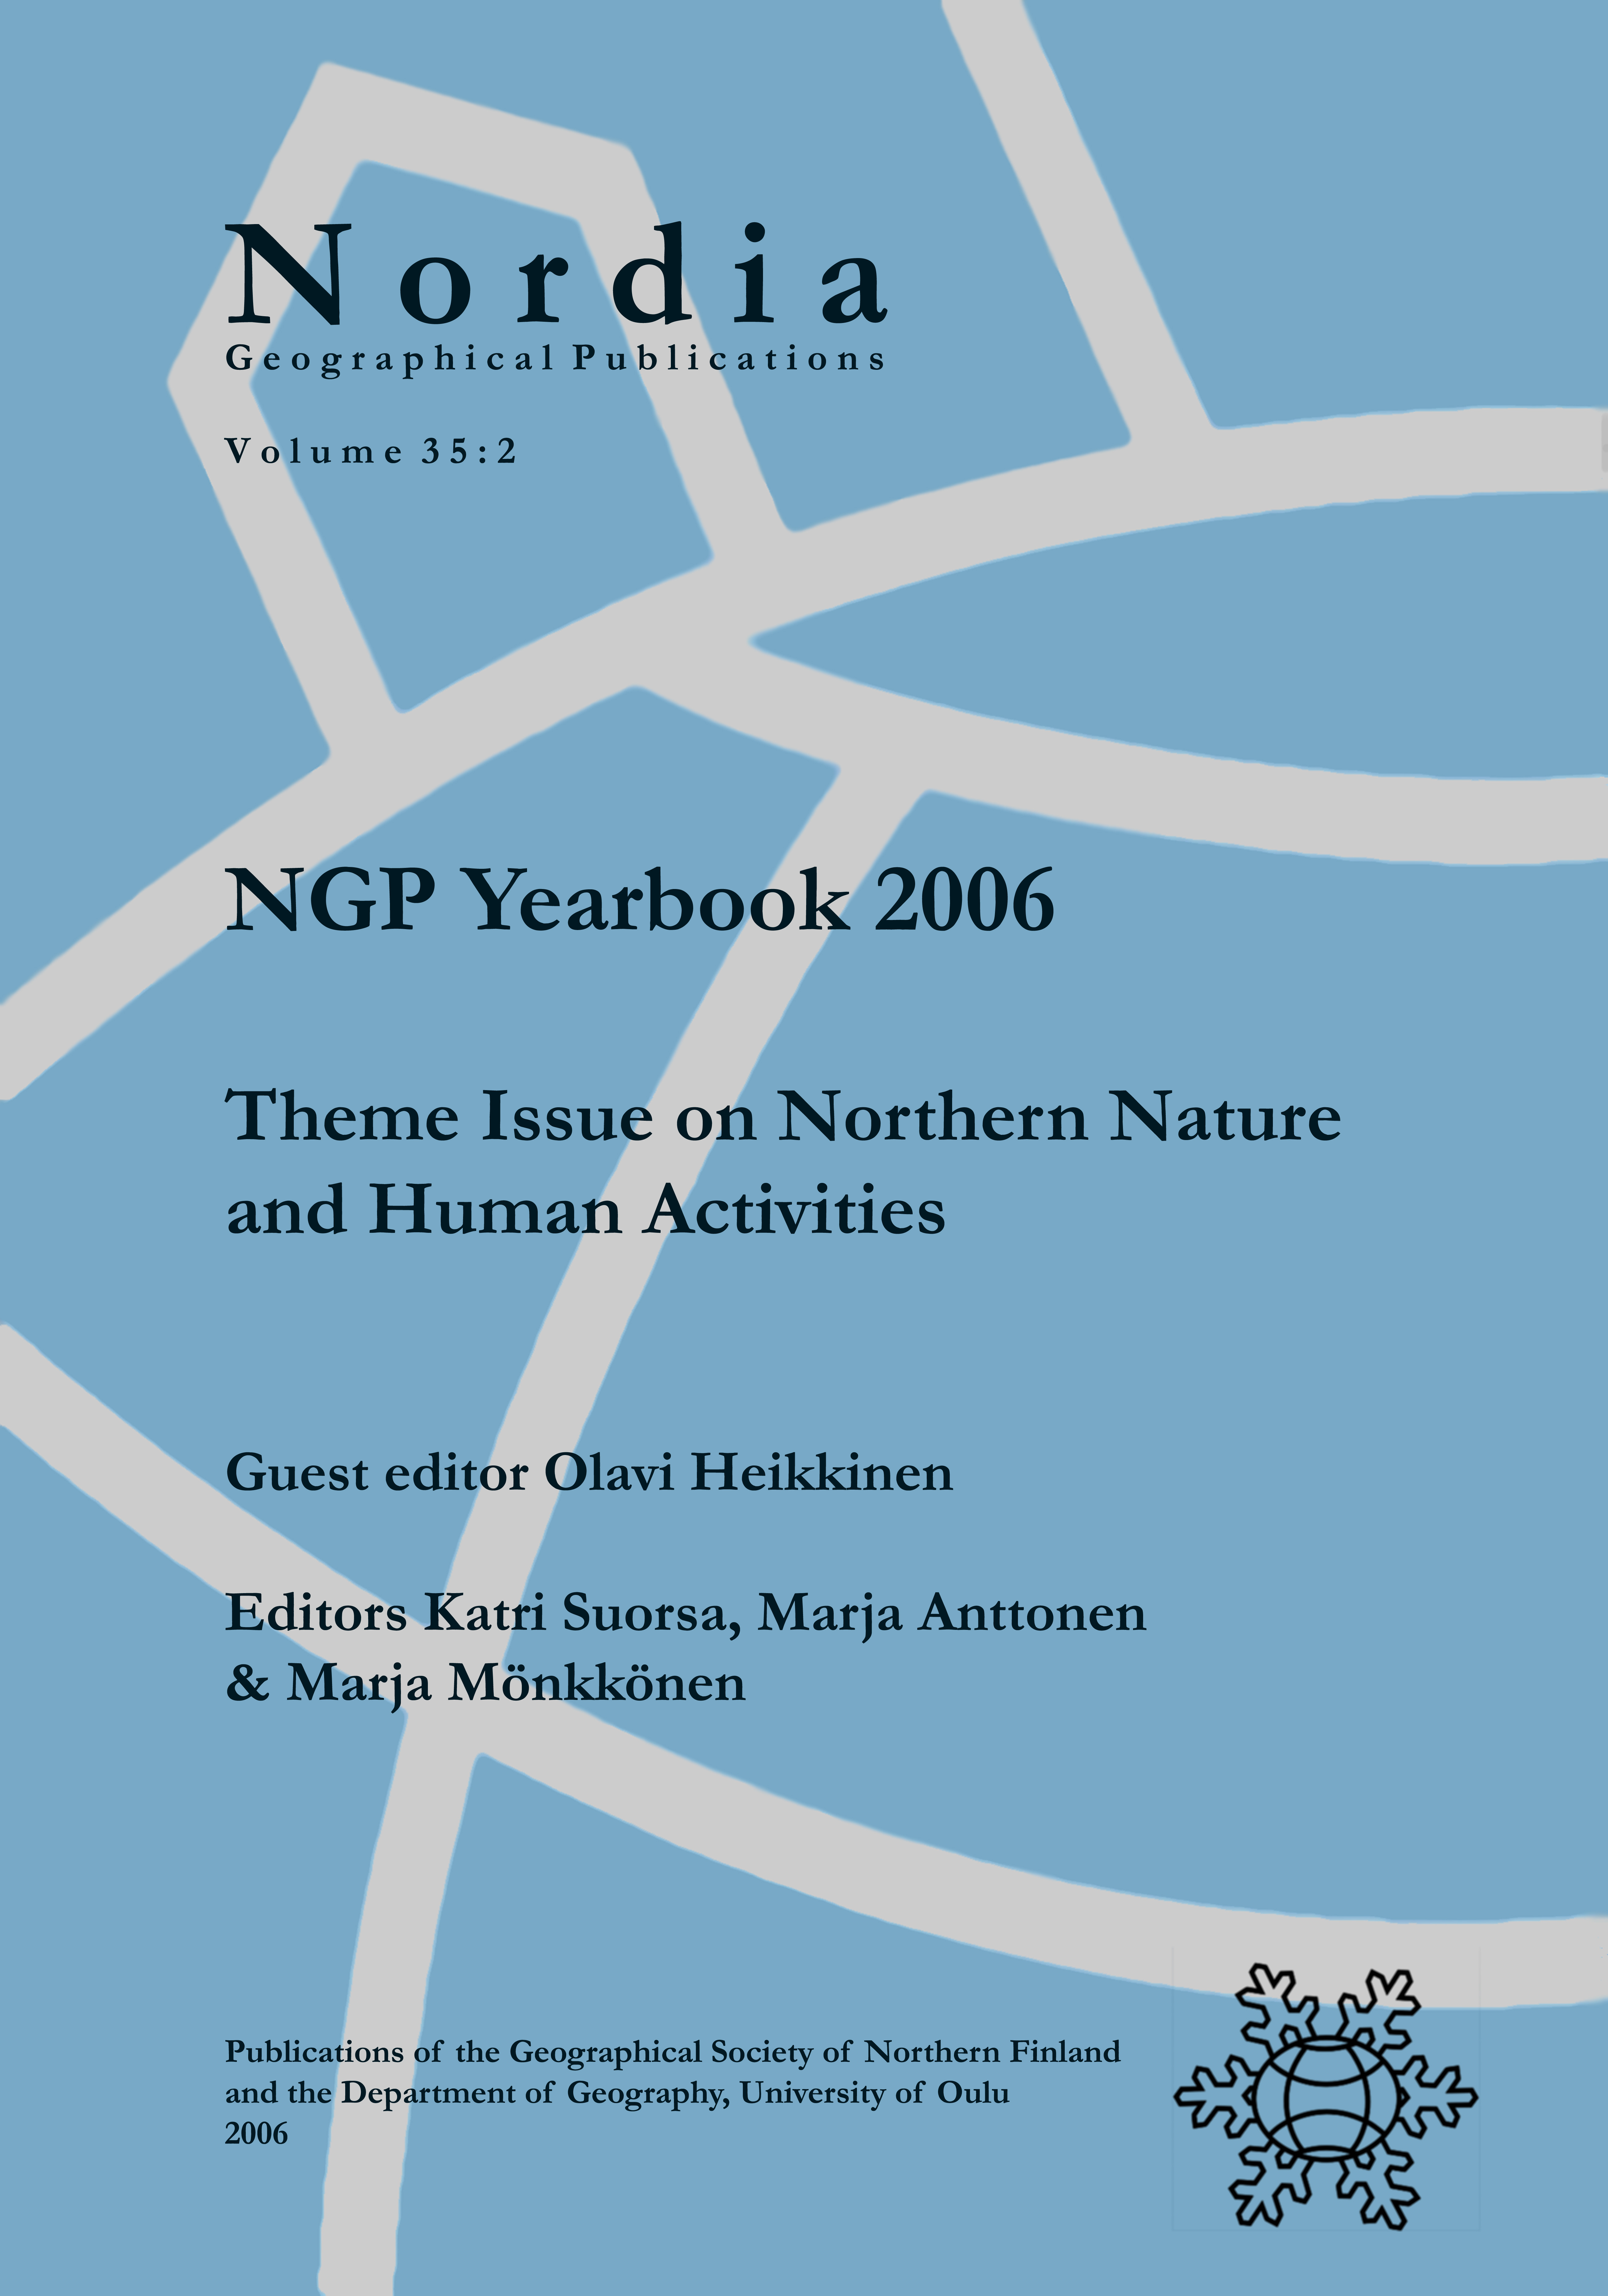 					Näytä Vol 35 Nro 2: NGP Yearbook 2006: Theme Issue on Northern Nature and Human Activities
				